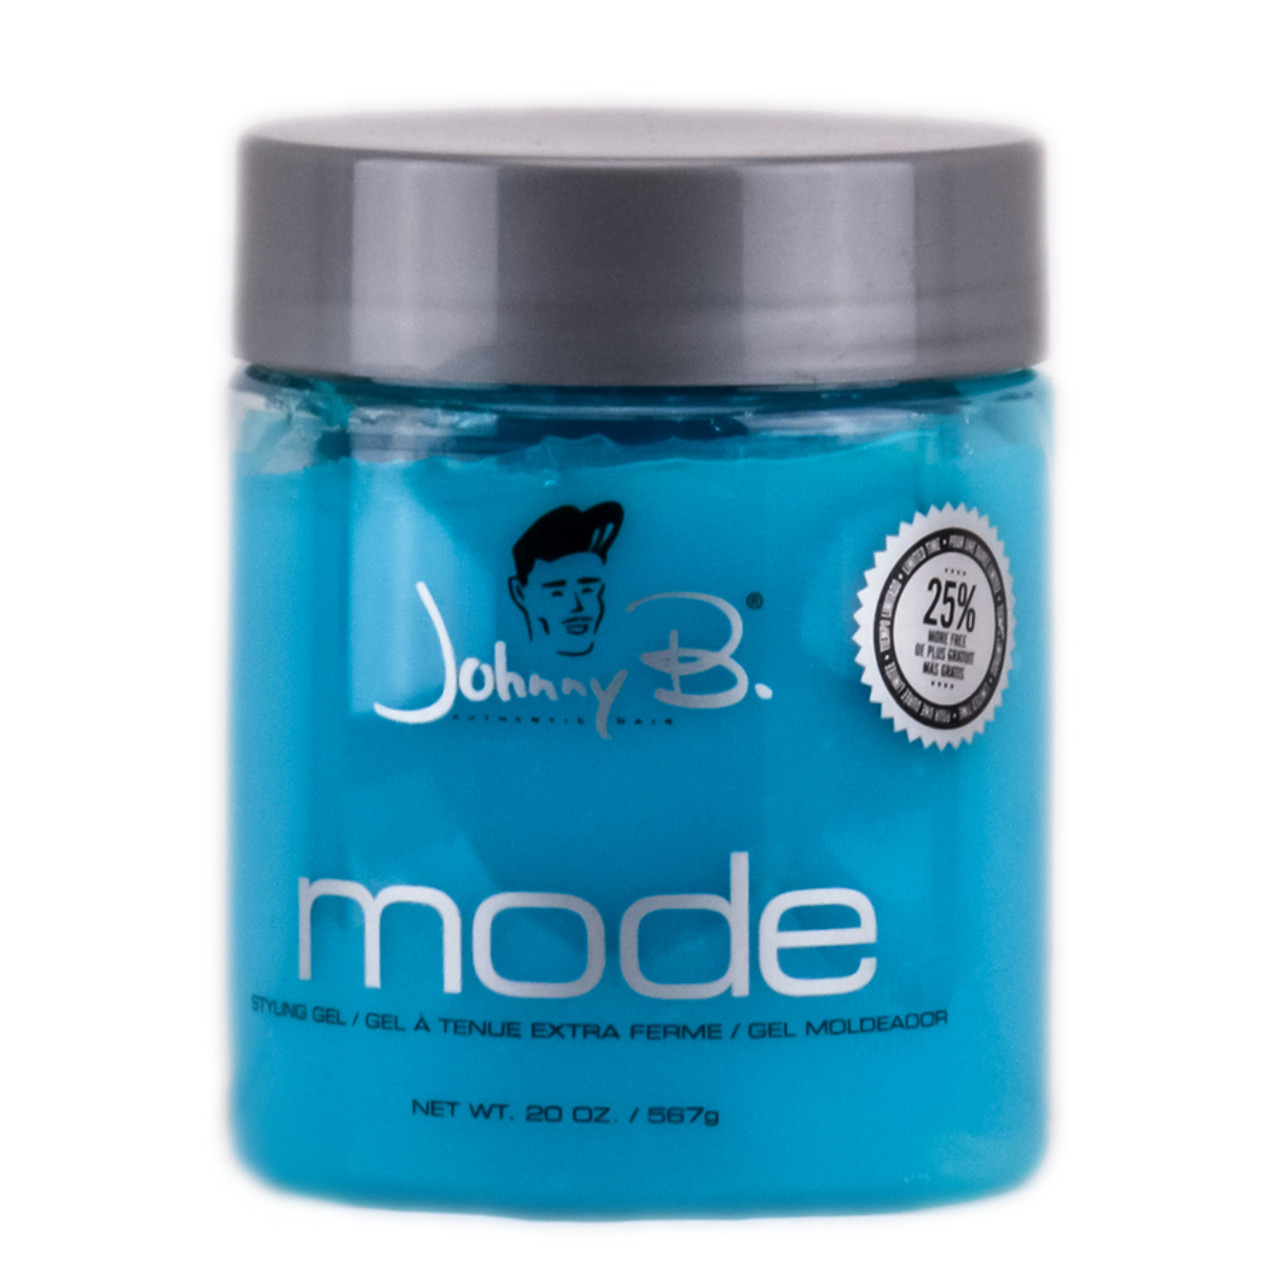 Johnny B Mode Hair Styling Gel for Men, Alcohol-Free, Water